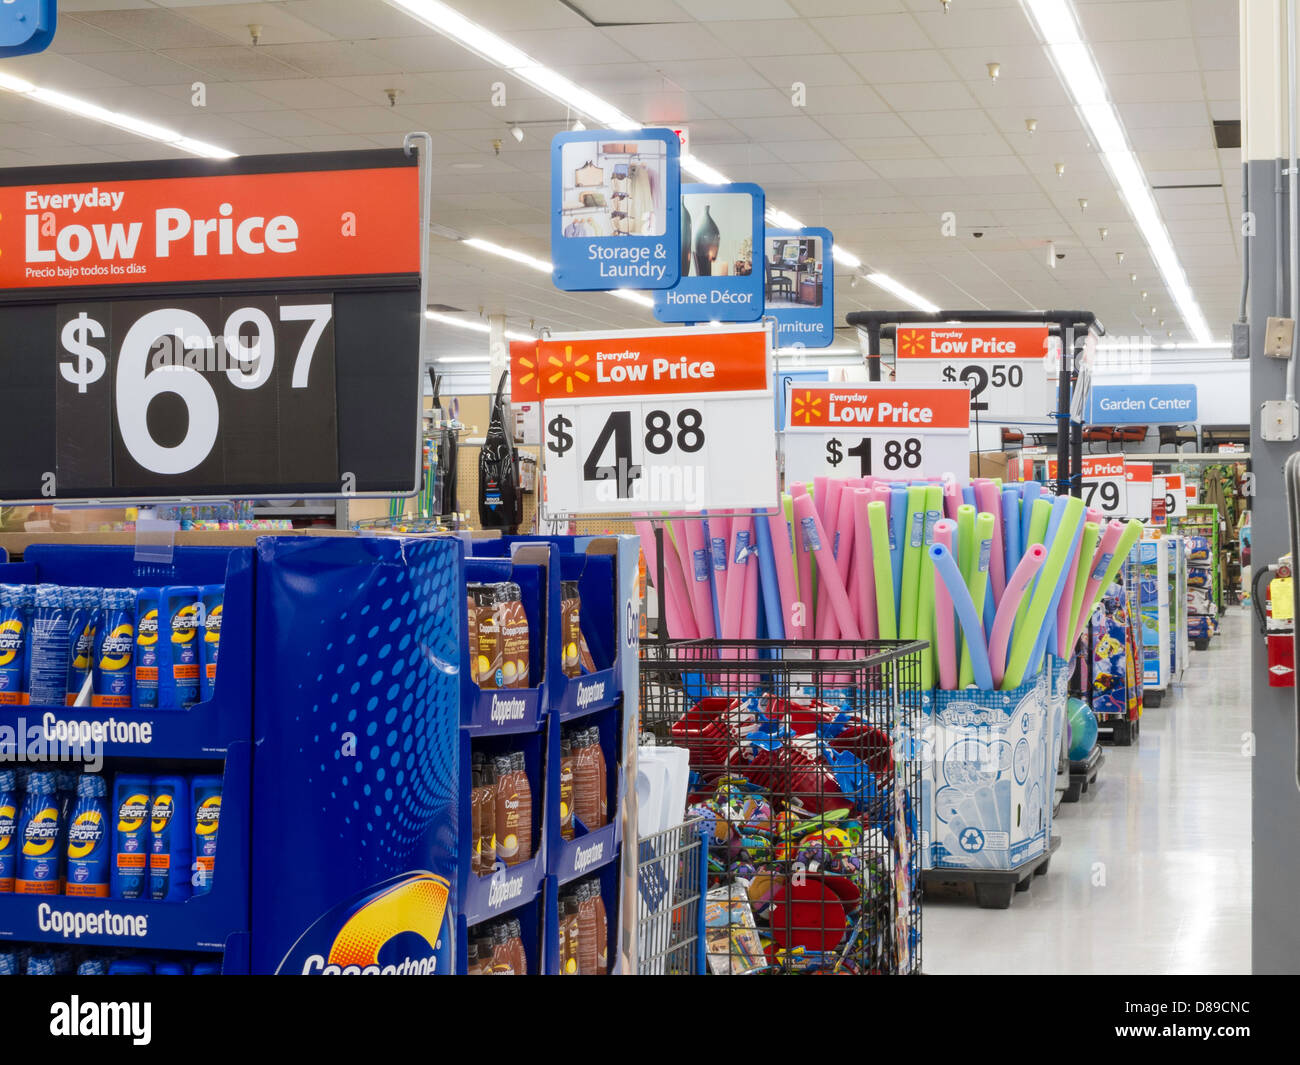 Walmart Discount Department Store, USA Stock Photo, Royalty Free Image: 56755928 - Alamy